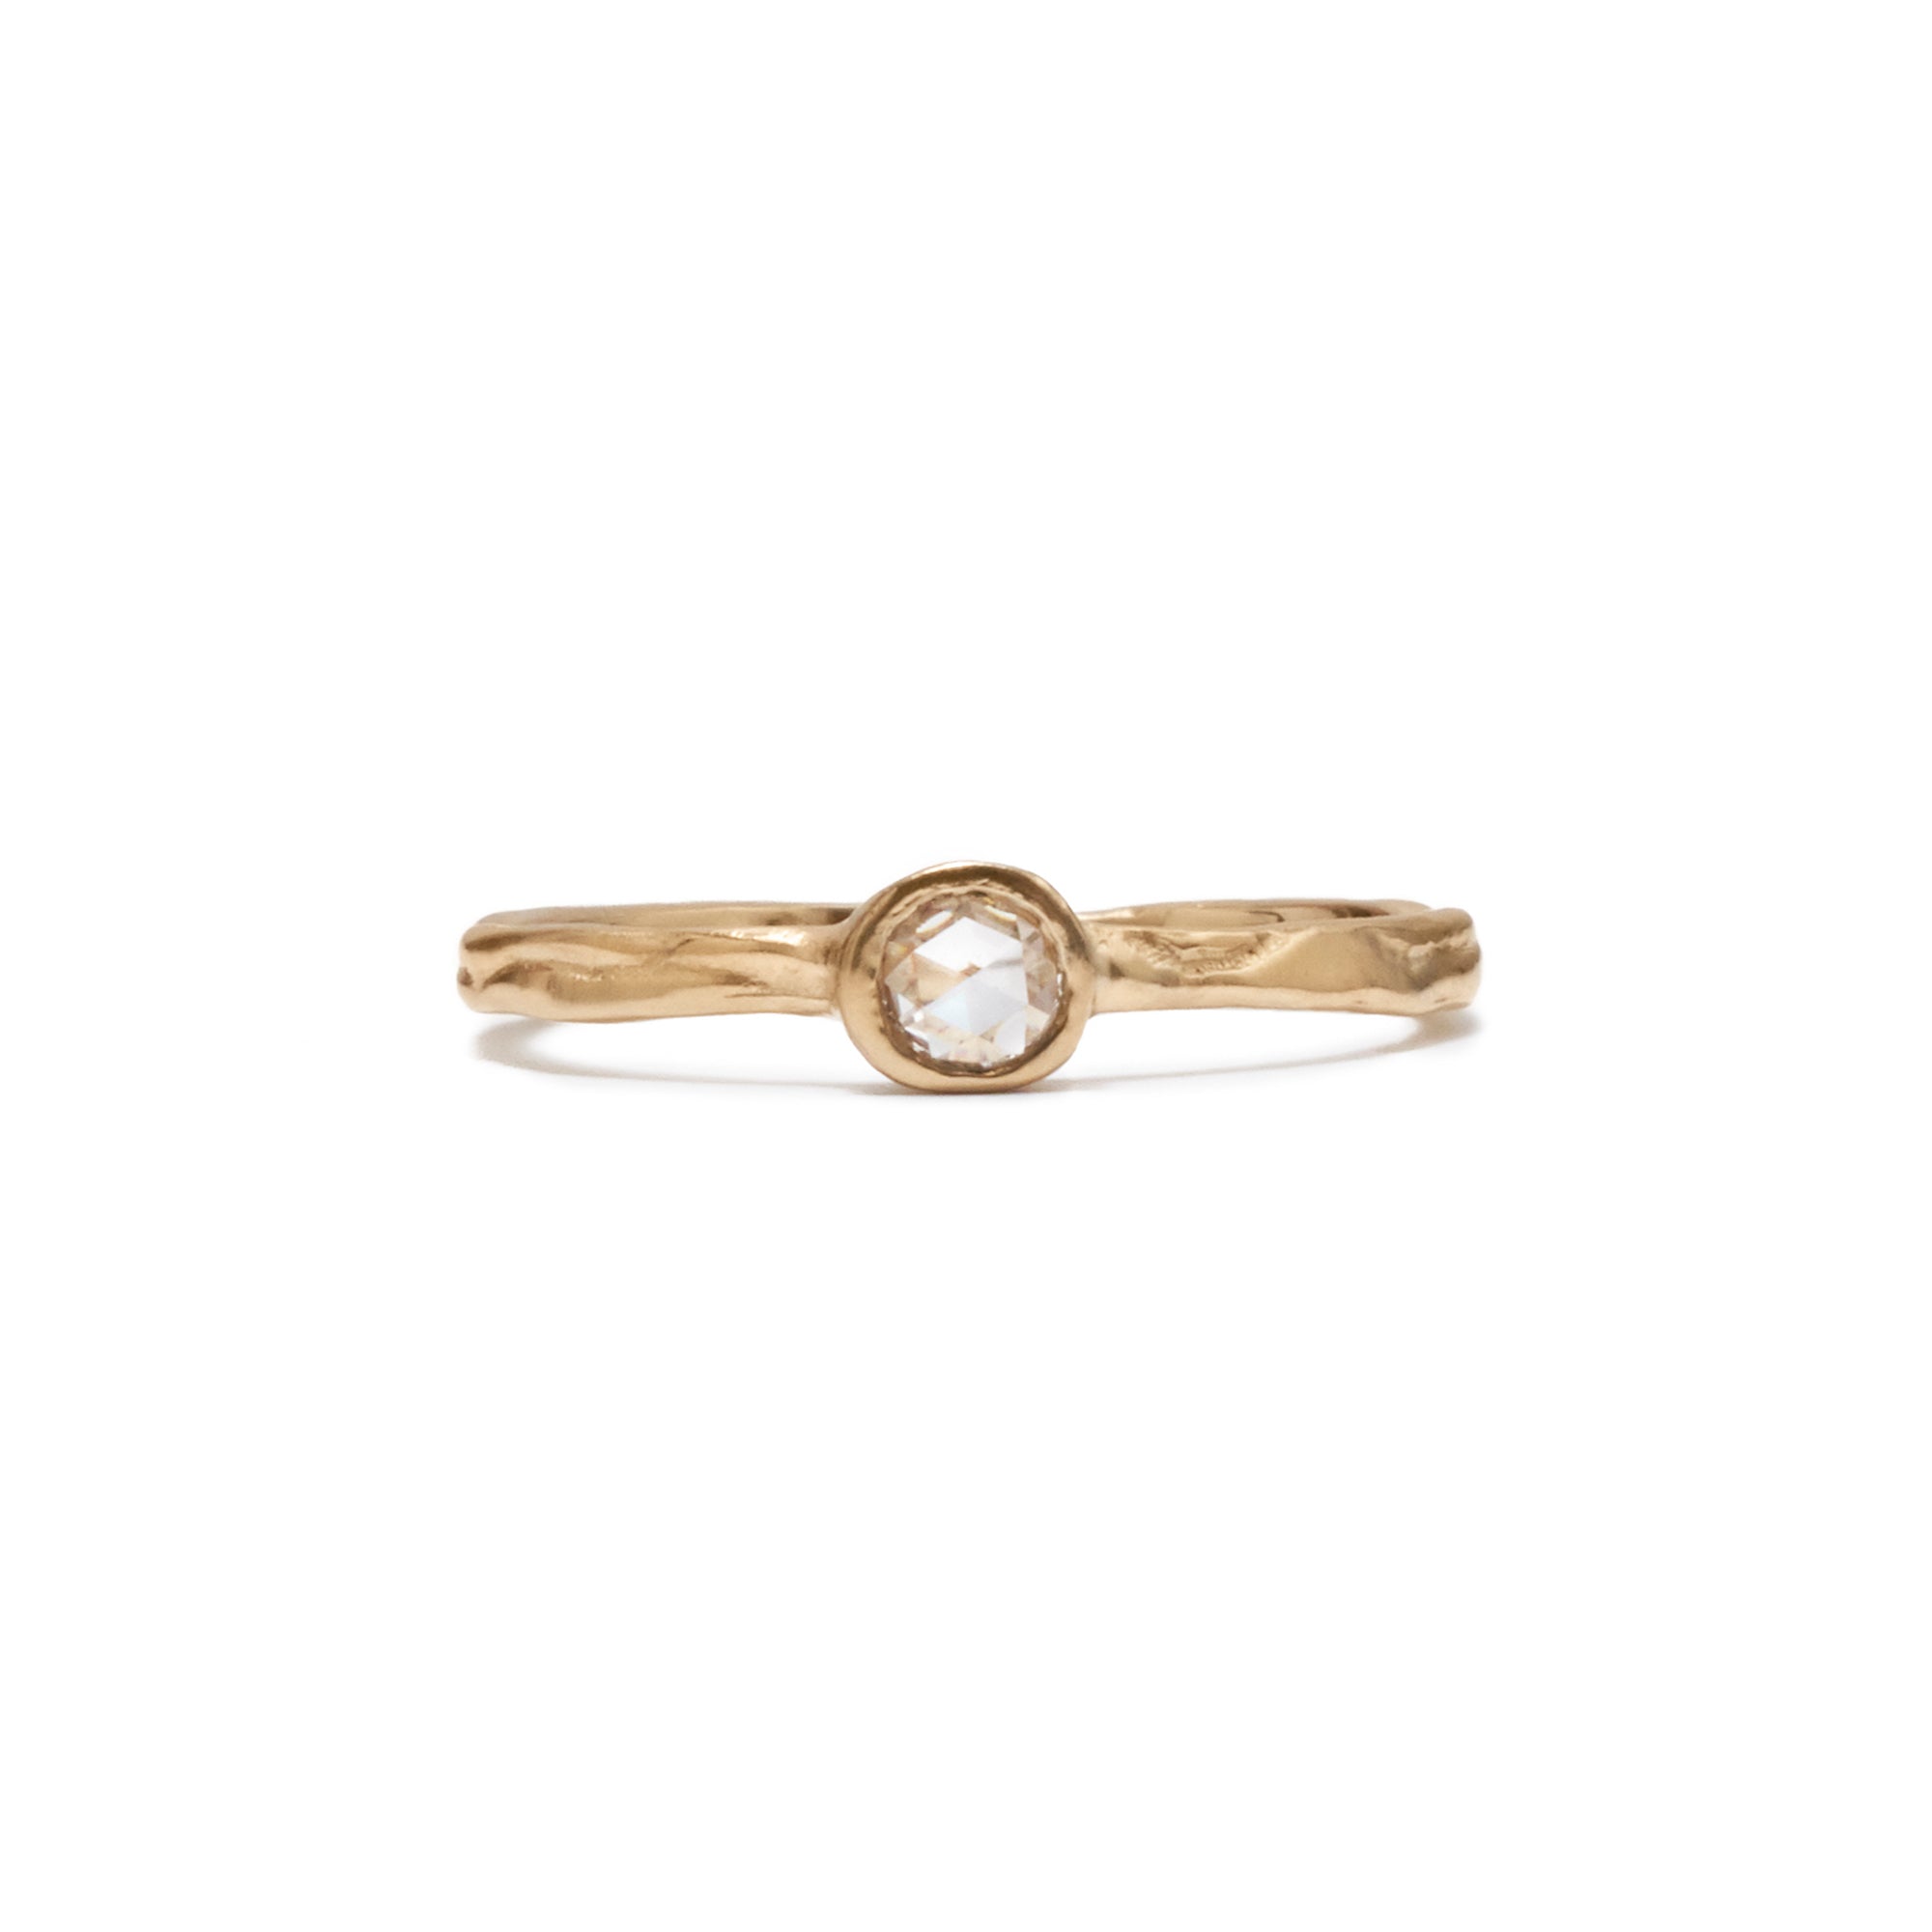 The Cusp diamond solitaire in 14k gold is the perfect way to commemorate an engagement or special occasion. 